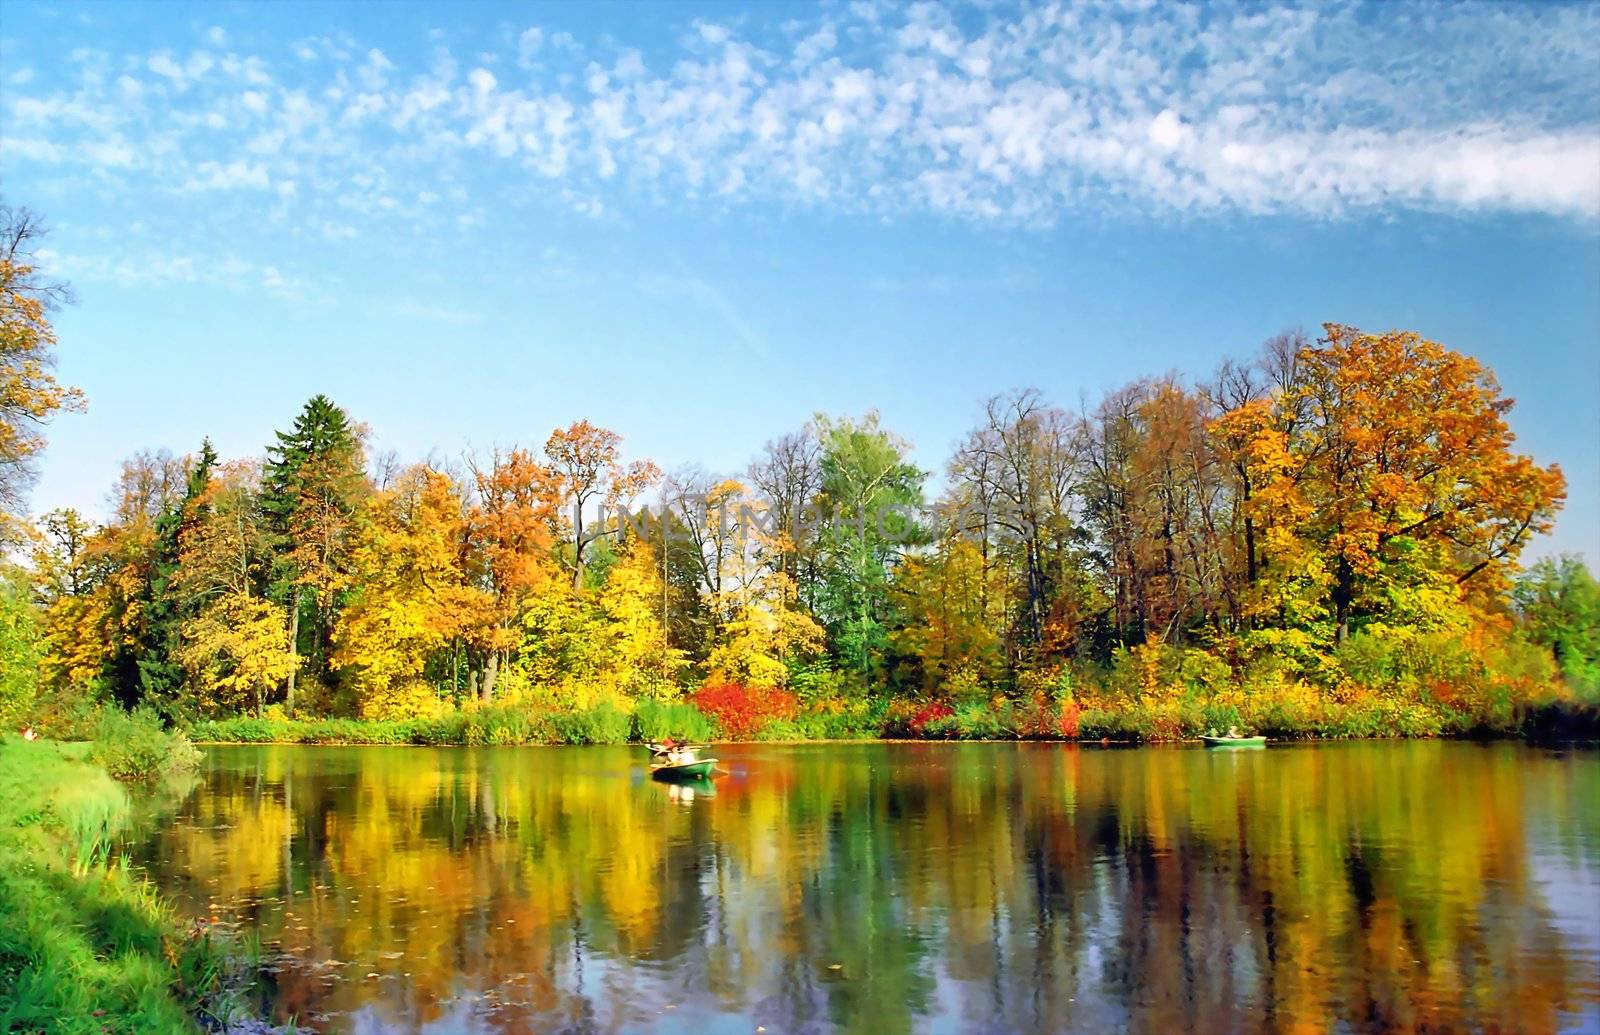 Lake with picturesque autumn trees and boats